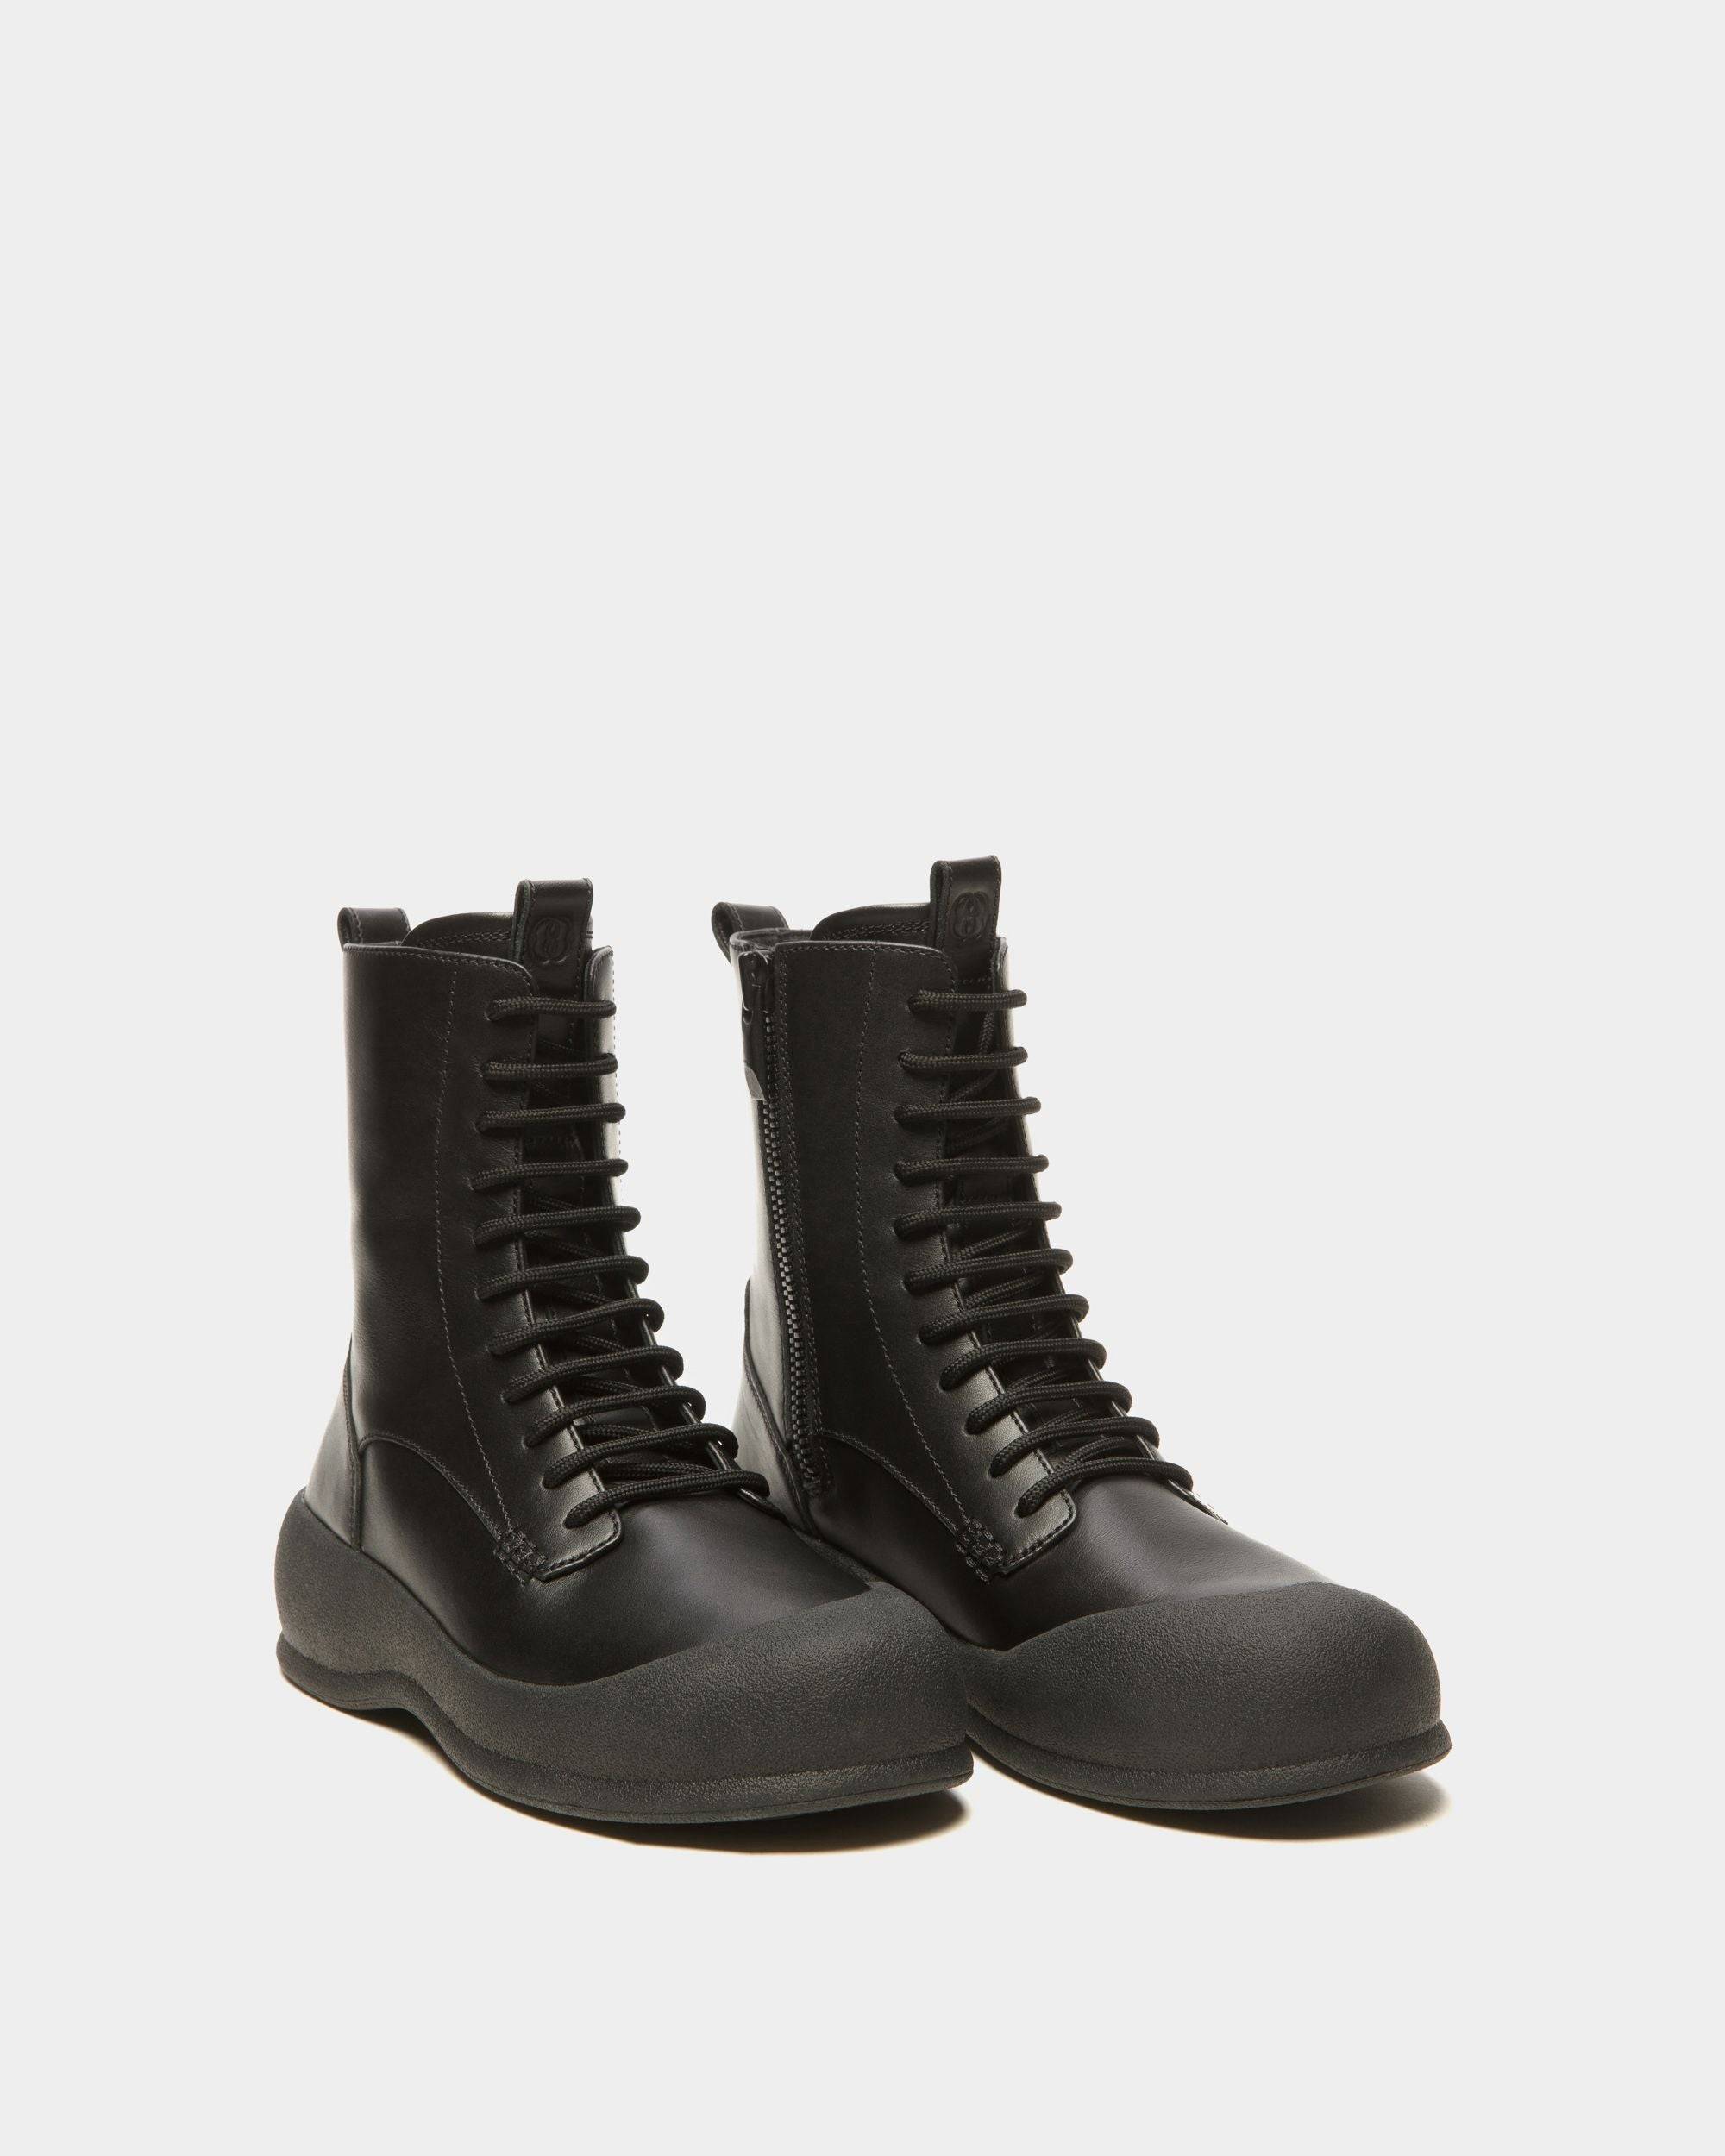 Celsyo | Women's Booties | Black Leather | Bally | Still Life 3/4 Front